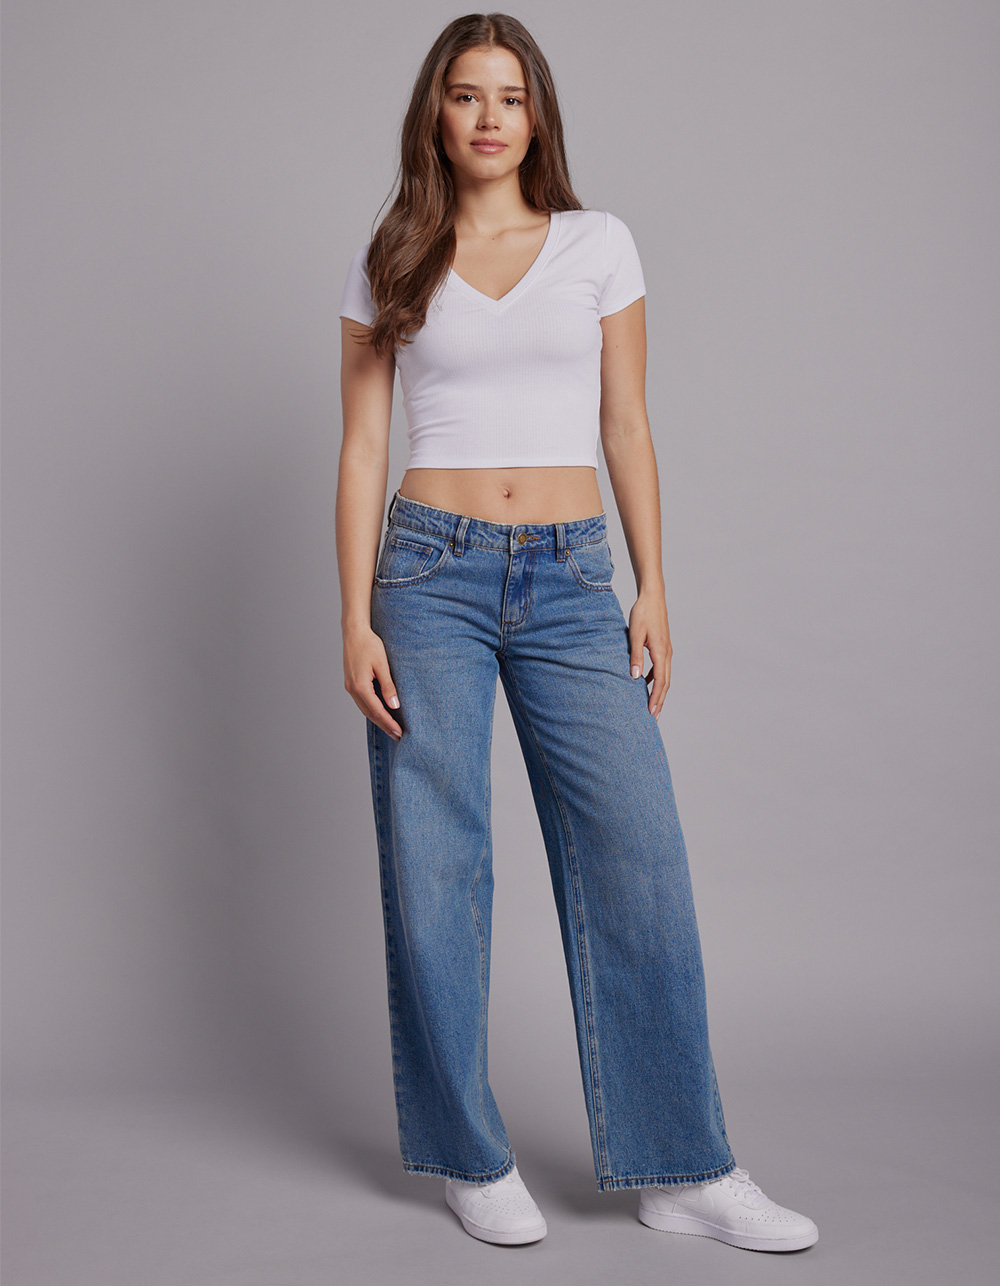 baggy Jeans For women